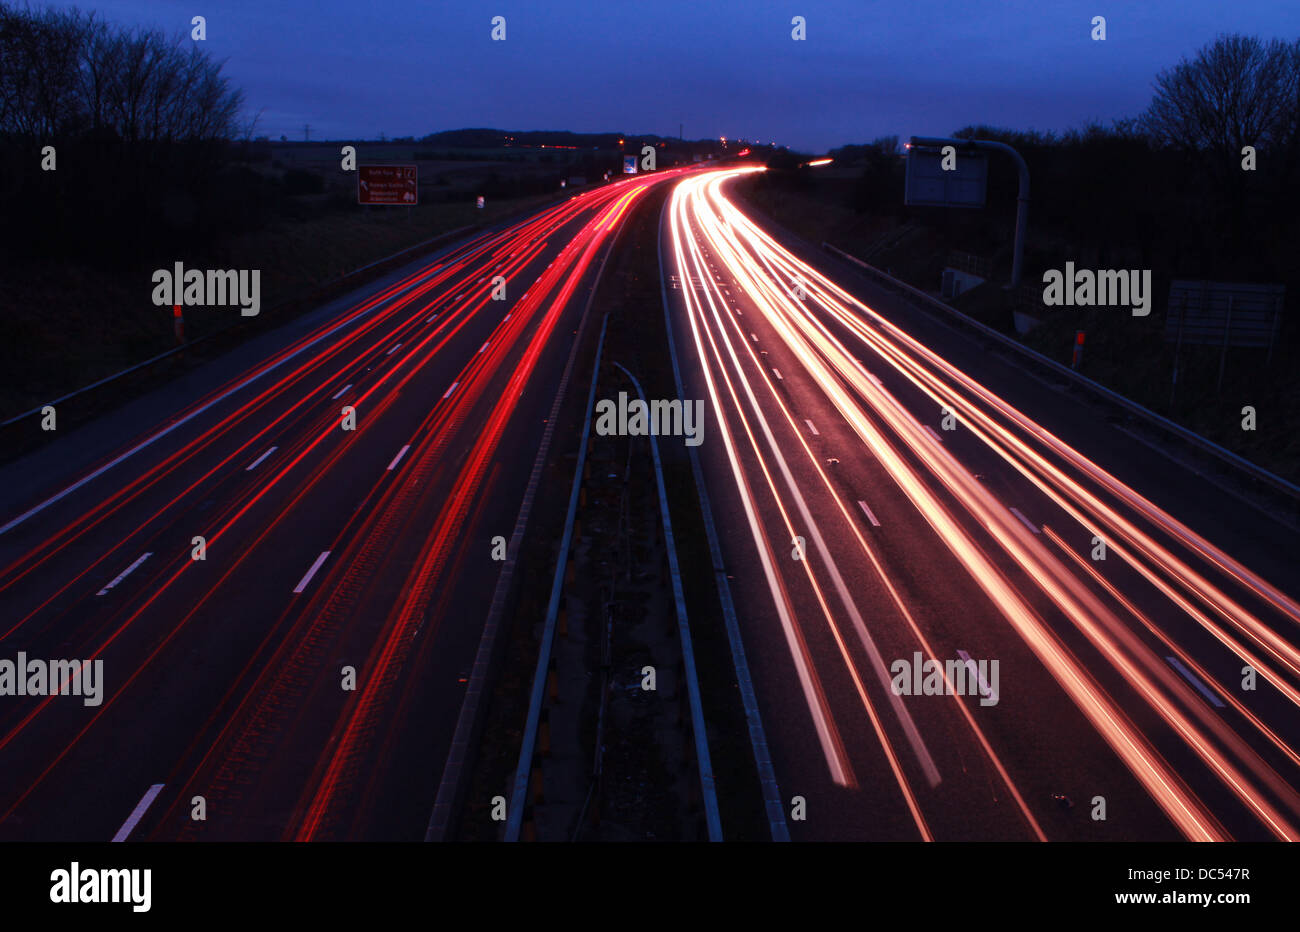 Motorway at night with car light trails Stock Photo